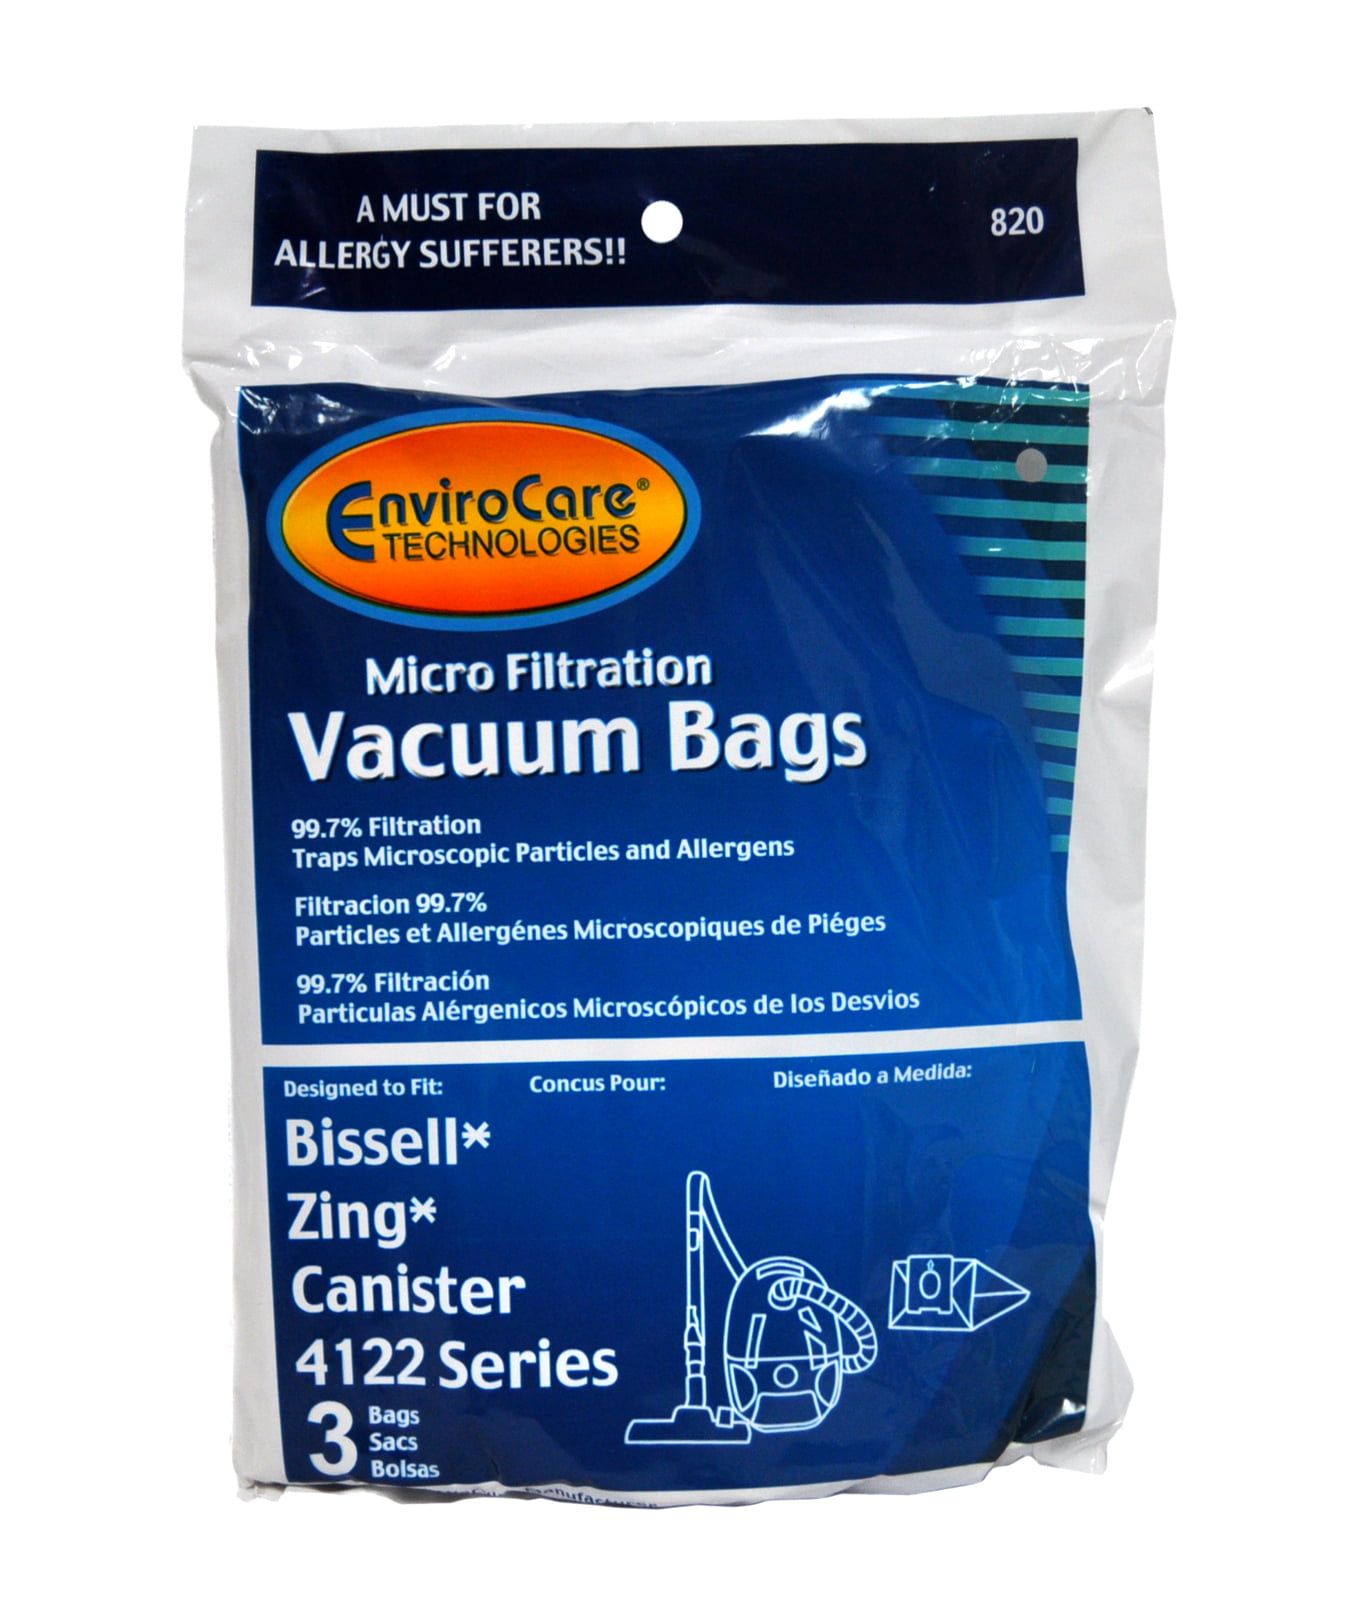 Genuine Bissell Zing 4122 Canister Vacuum Bags w/ Pre & Post Filter 2138425 1480 